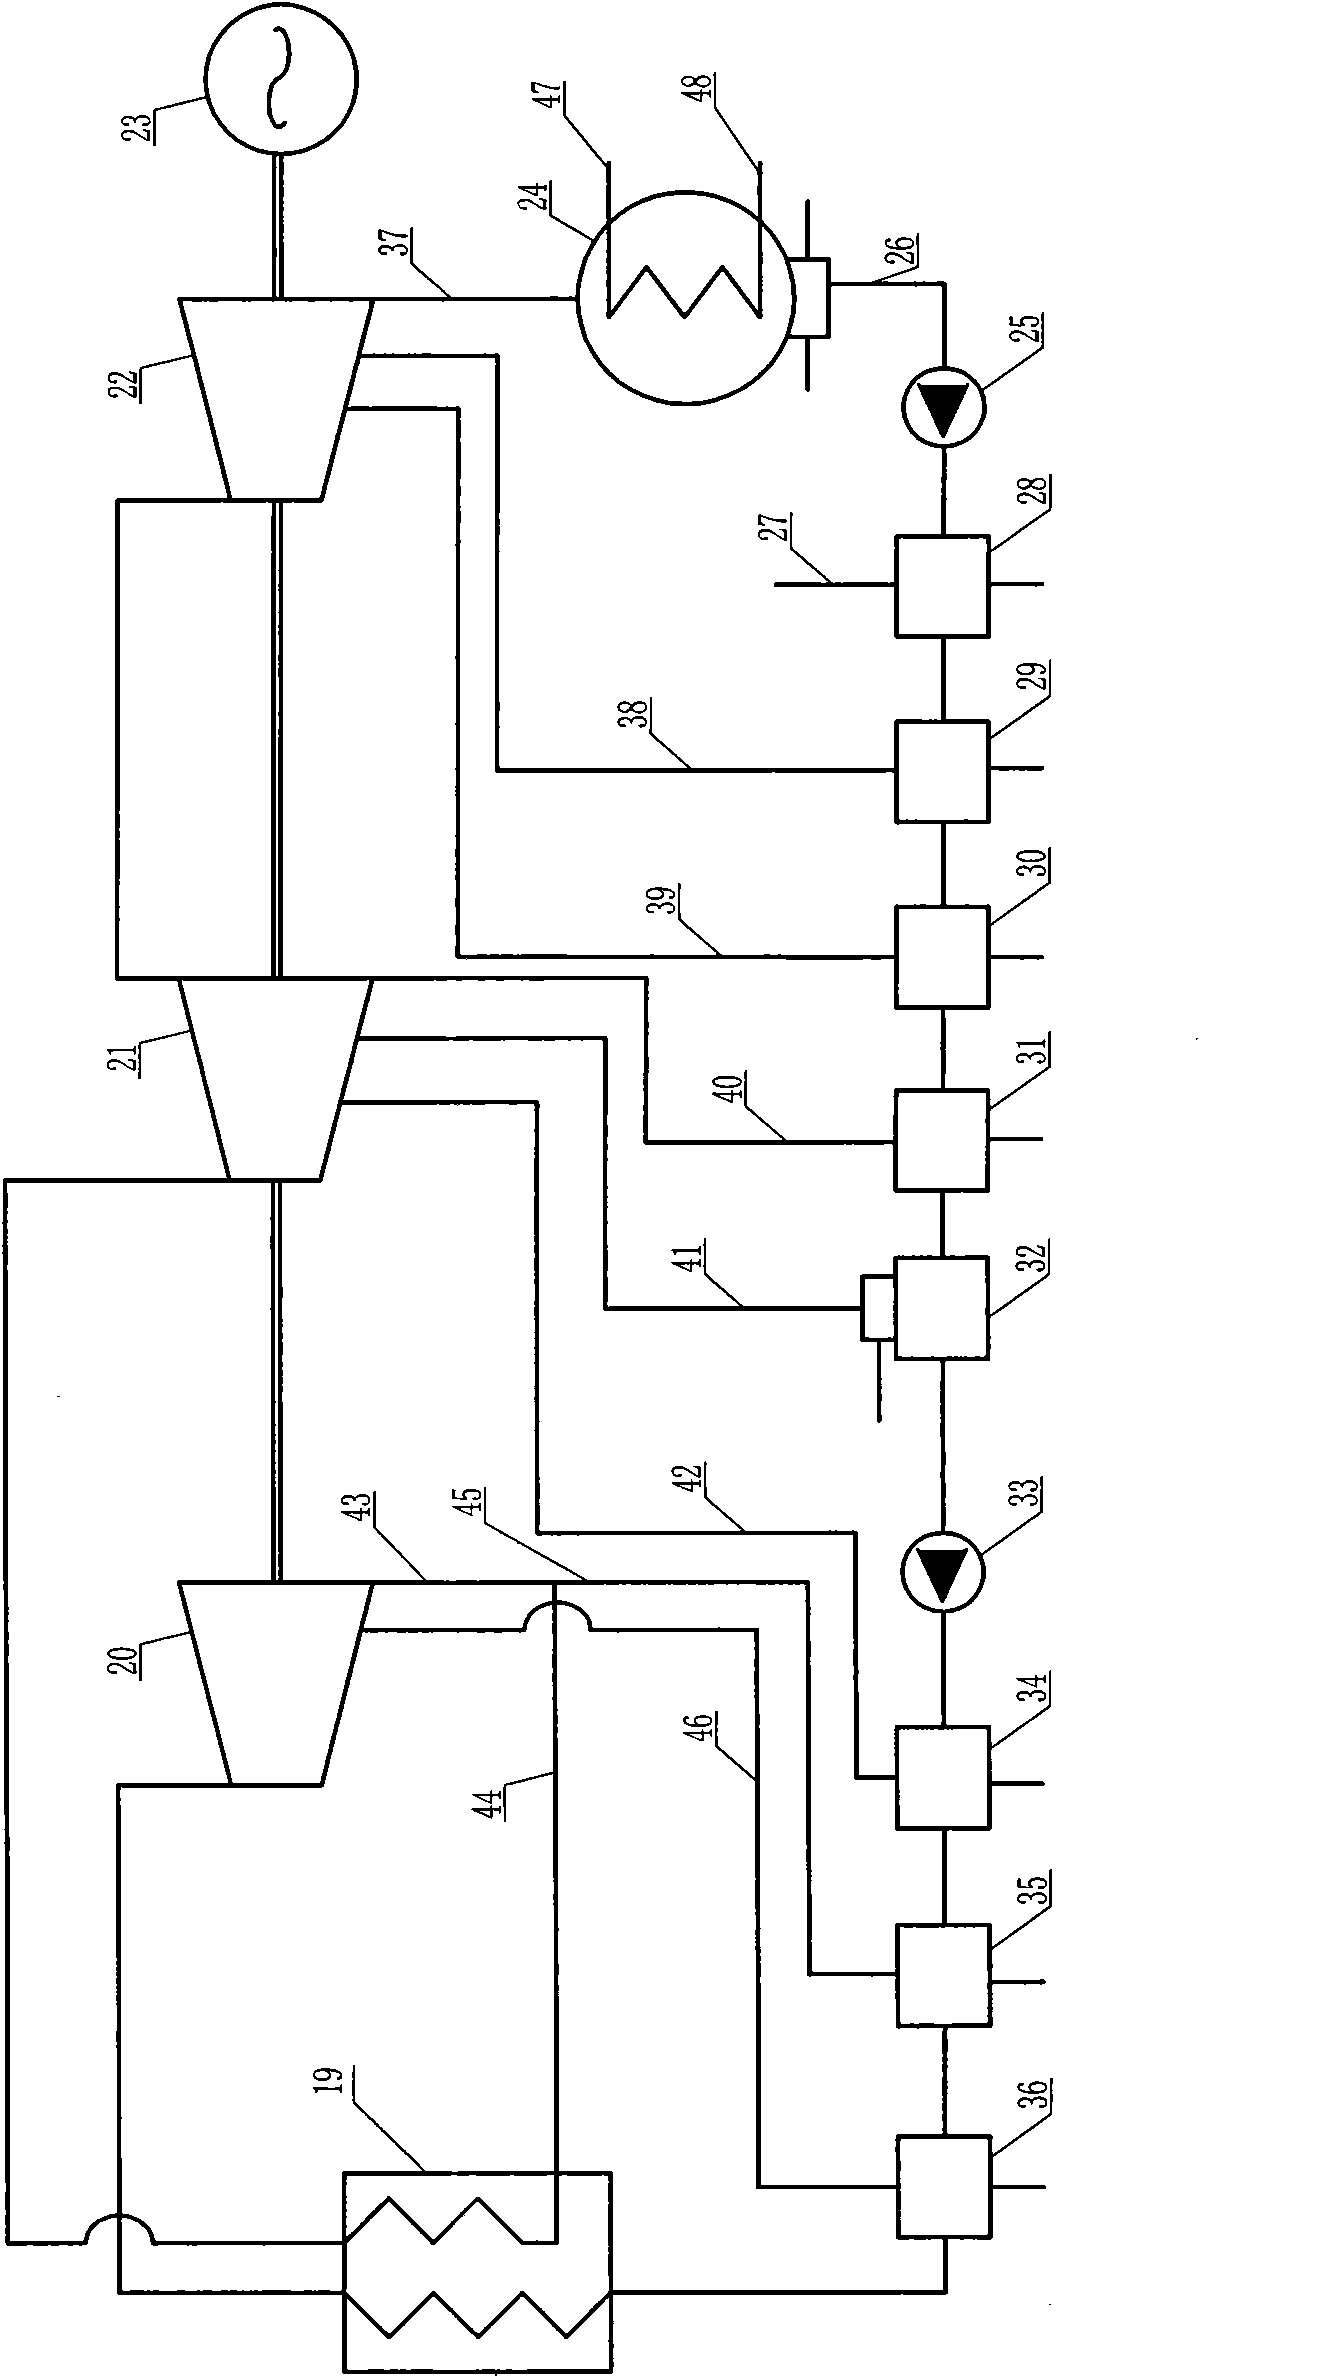 Application of second type absorption type heat pump in heat exchange cycle system of power plant